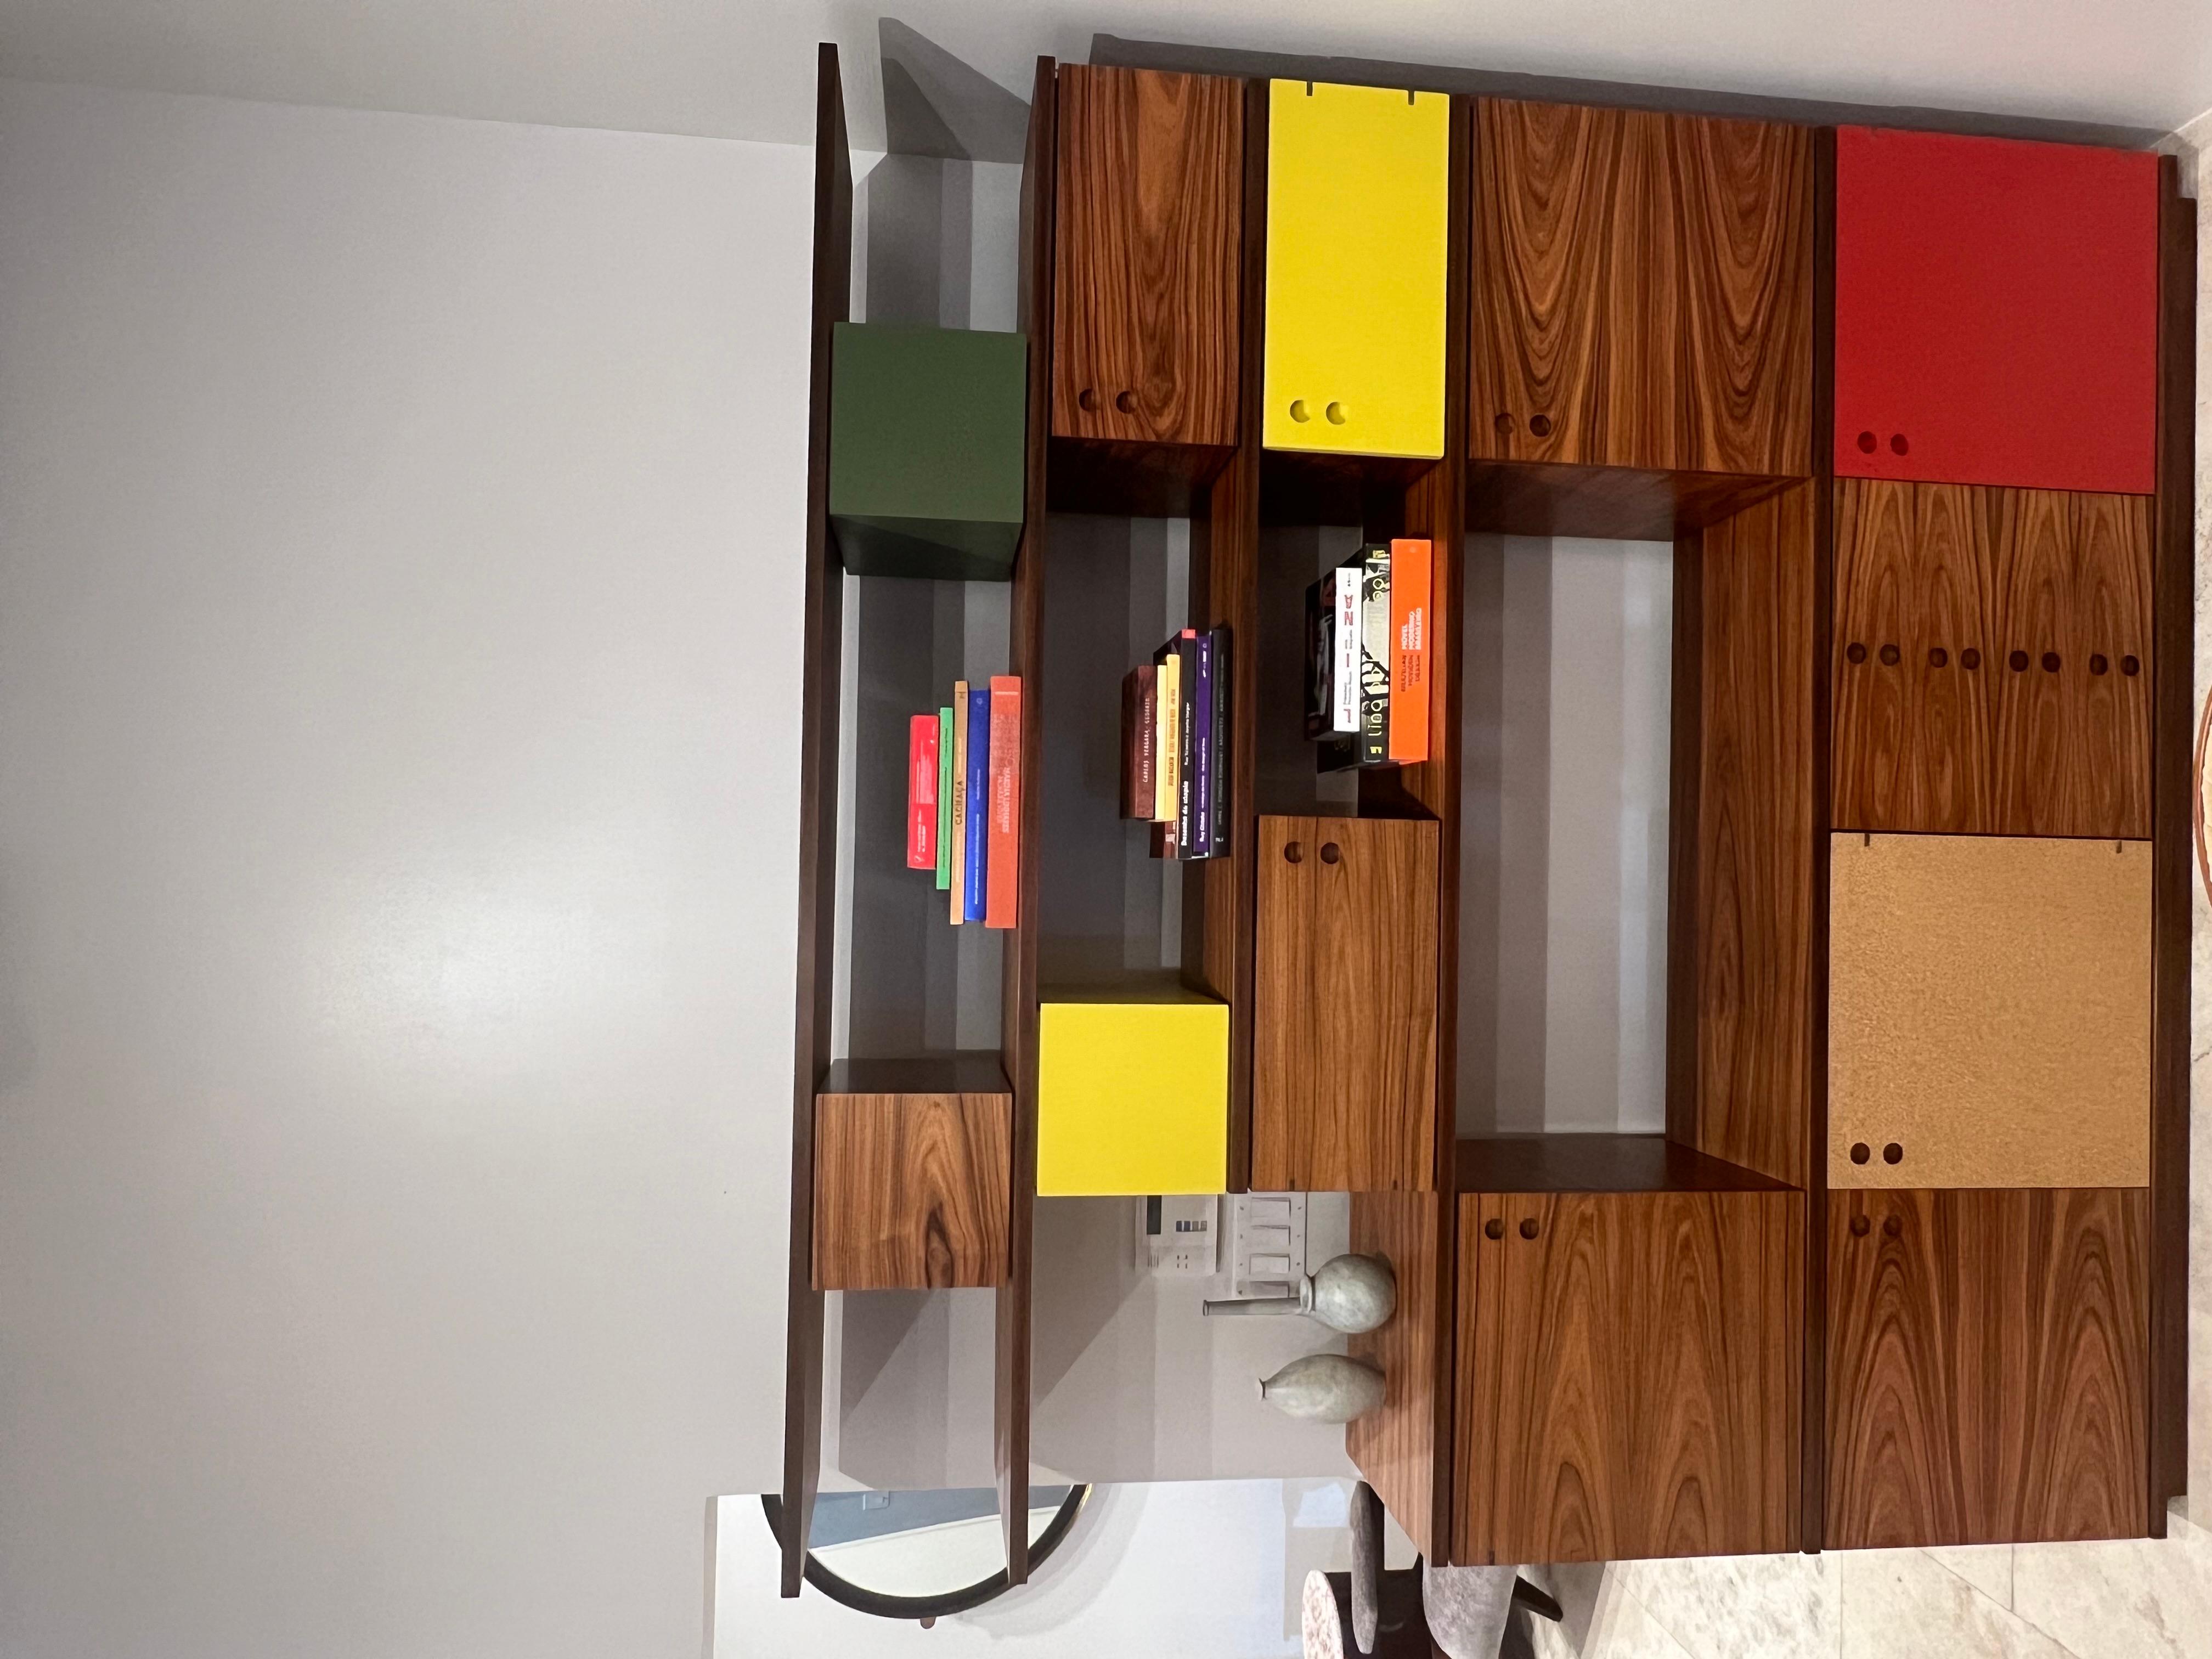 Kovacs bookcase
1959 / re-edited2019

A collection of modular module in Pau Ferro wood designed by Jorge Zalszupin in the 1950s/60s, inspired by the arrangement and colors commissioned by the Kovacs family in the 1960s.

Jorge Zalszupin born in